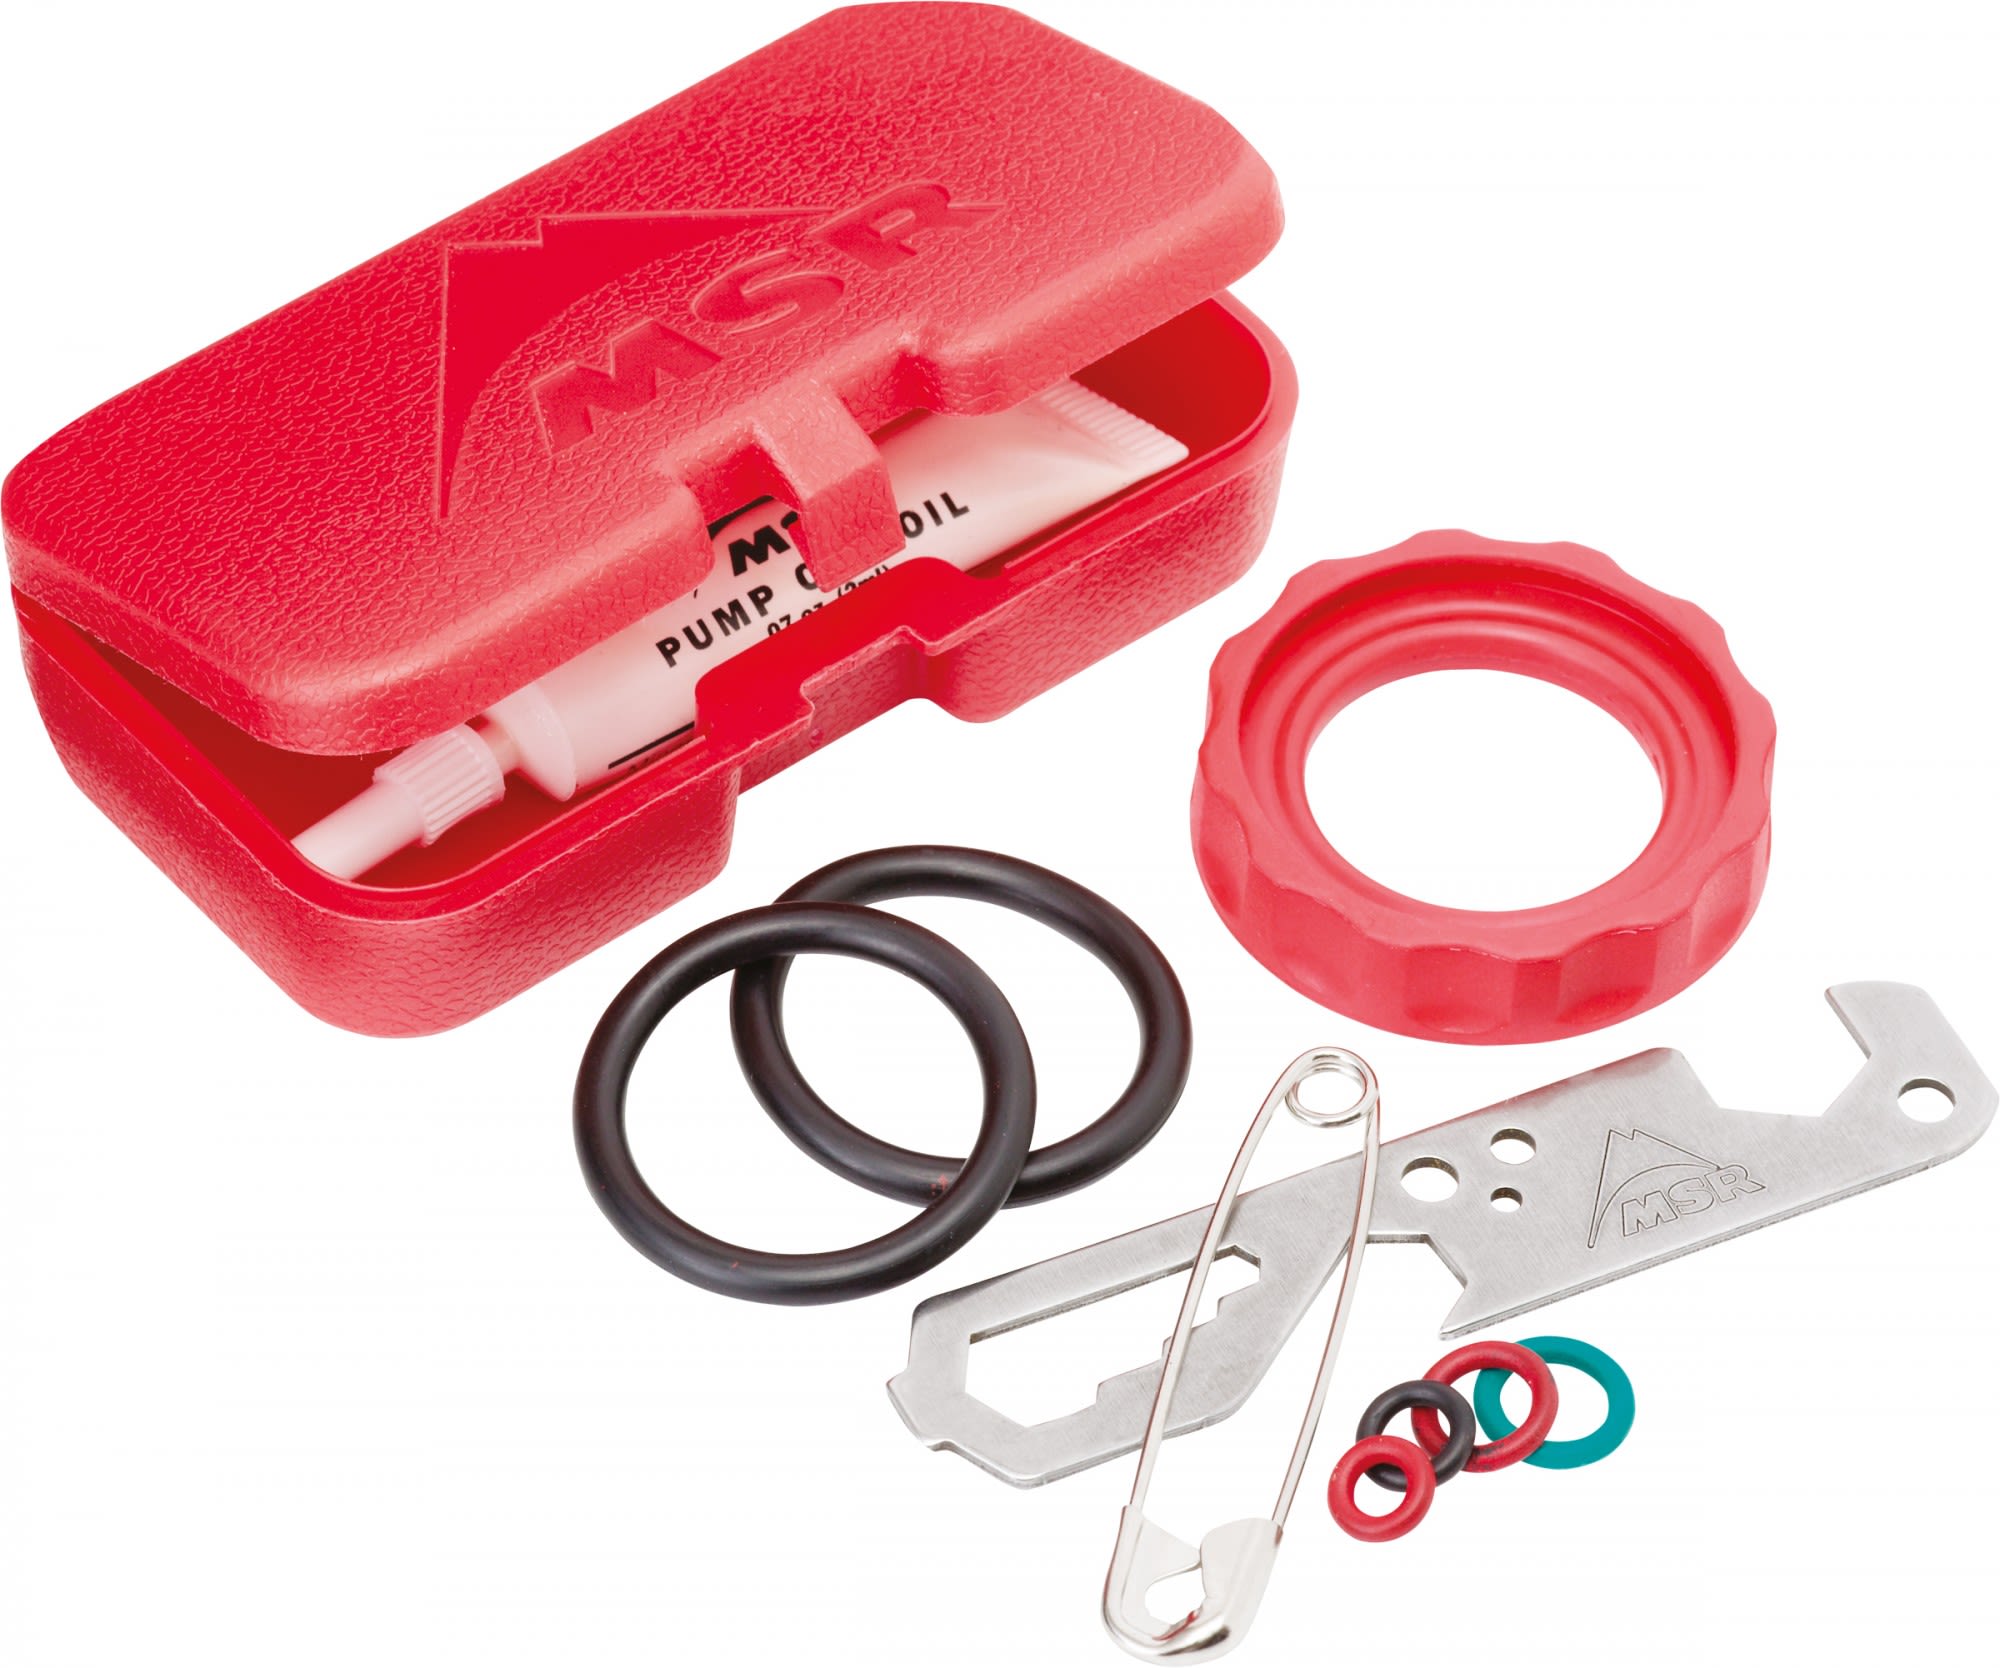 MSR Annual Maintenance KIt Rot- Kocher-Zubehr- Grsse One Size - Farbe Red